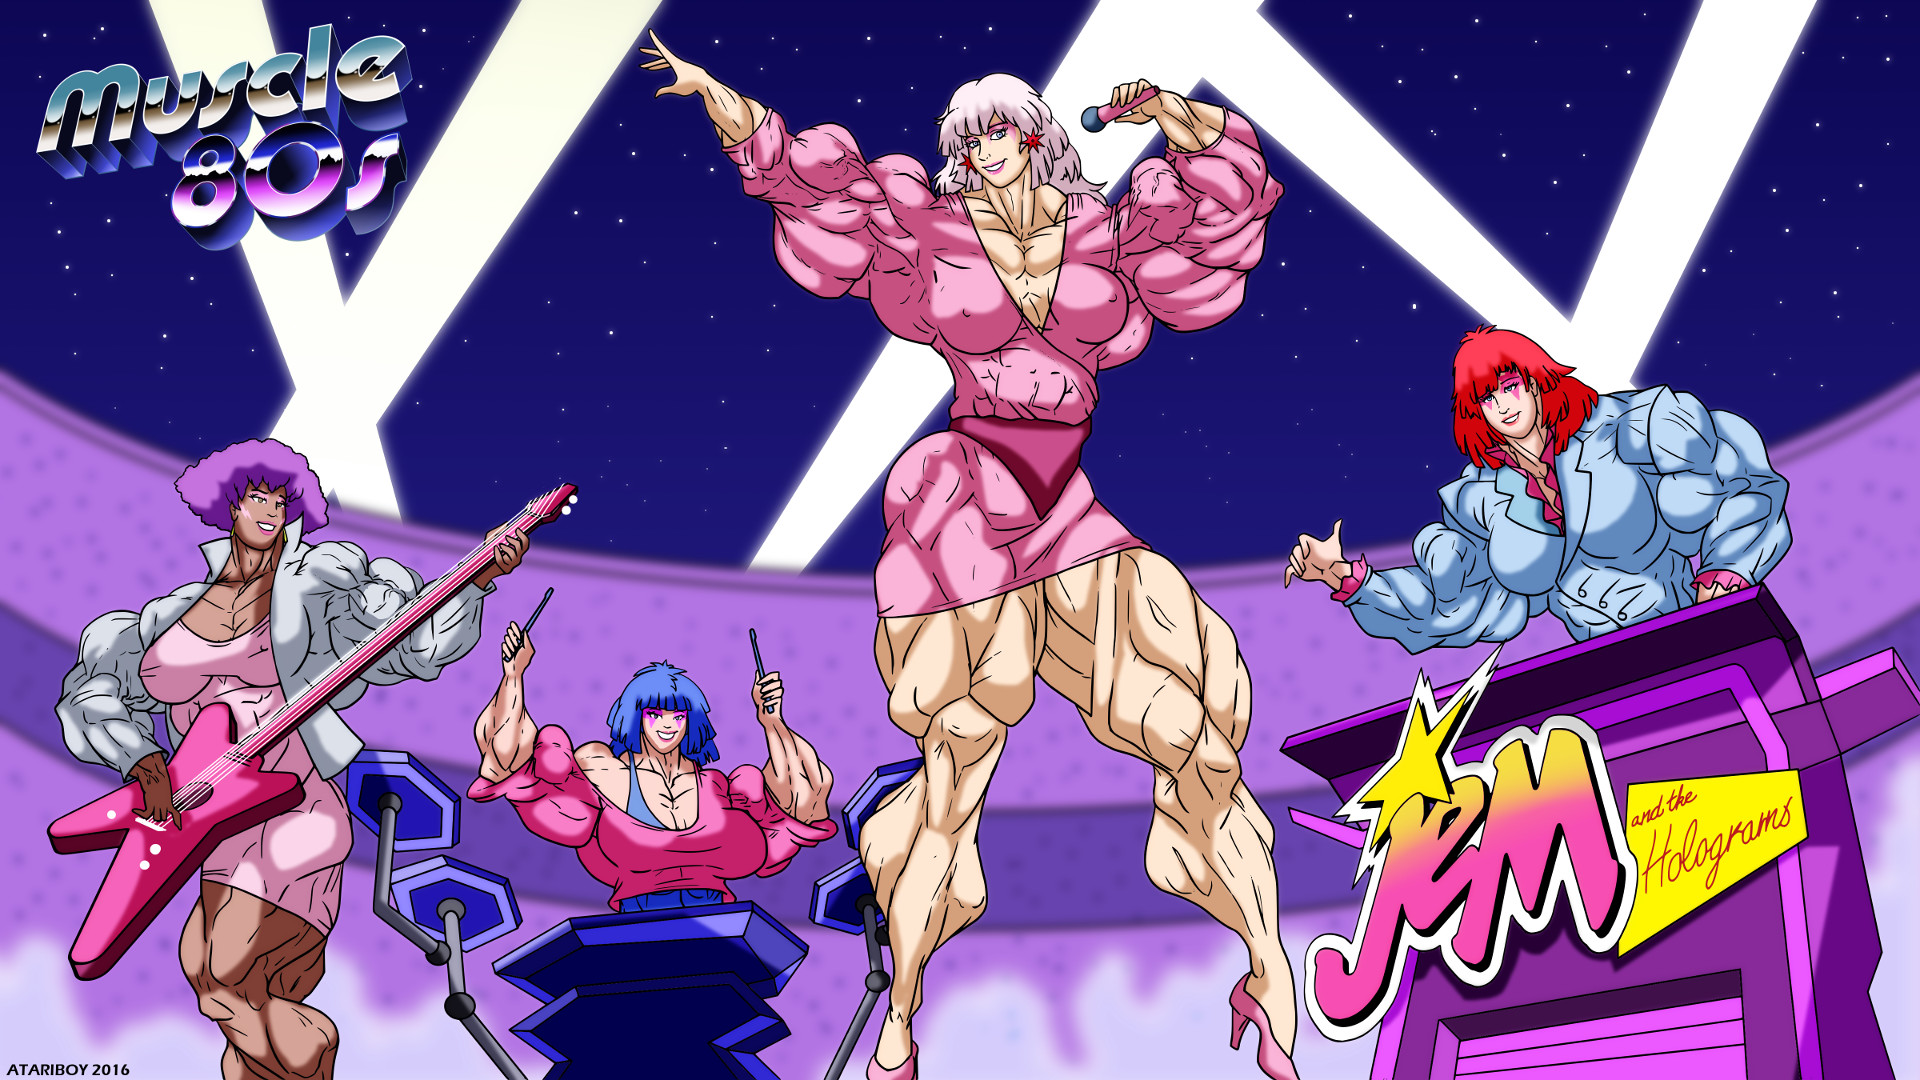 1920x1080 ... Muscle 80s - Jem And The Holograms. by Atariboy2600